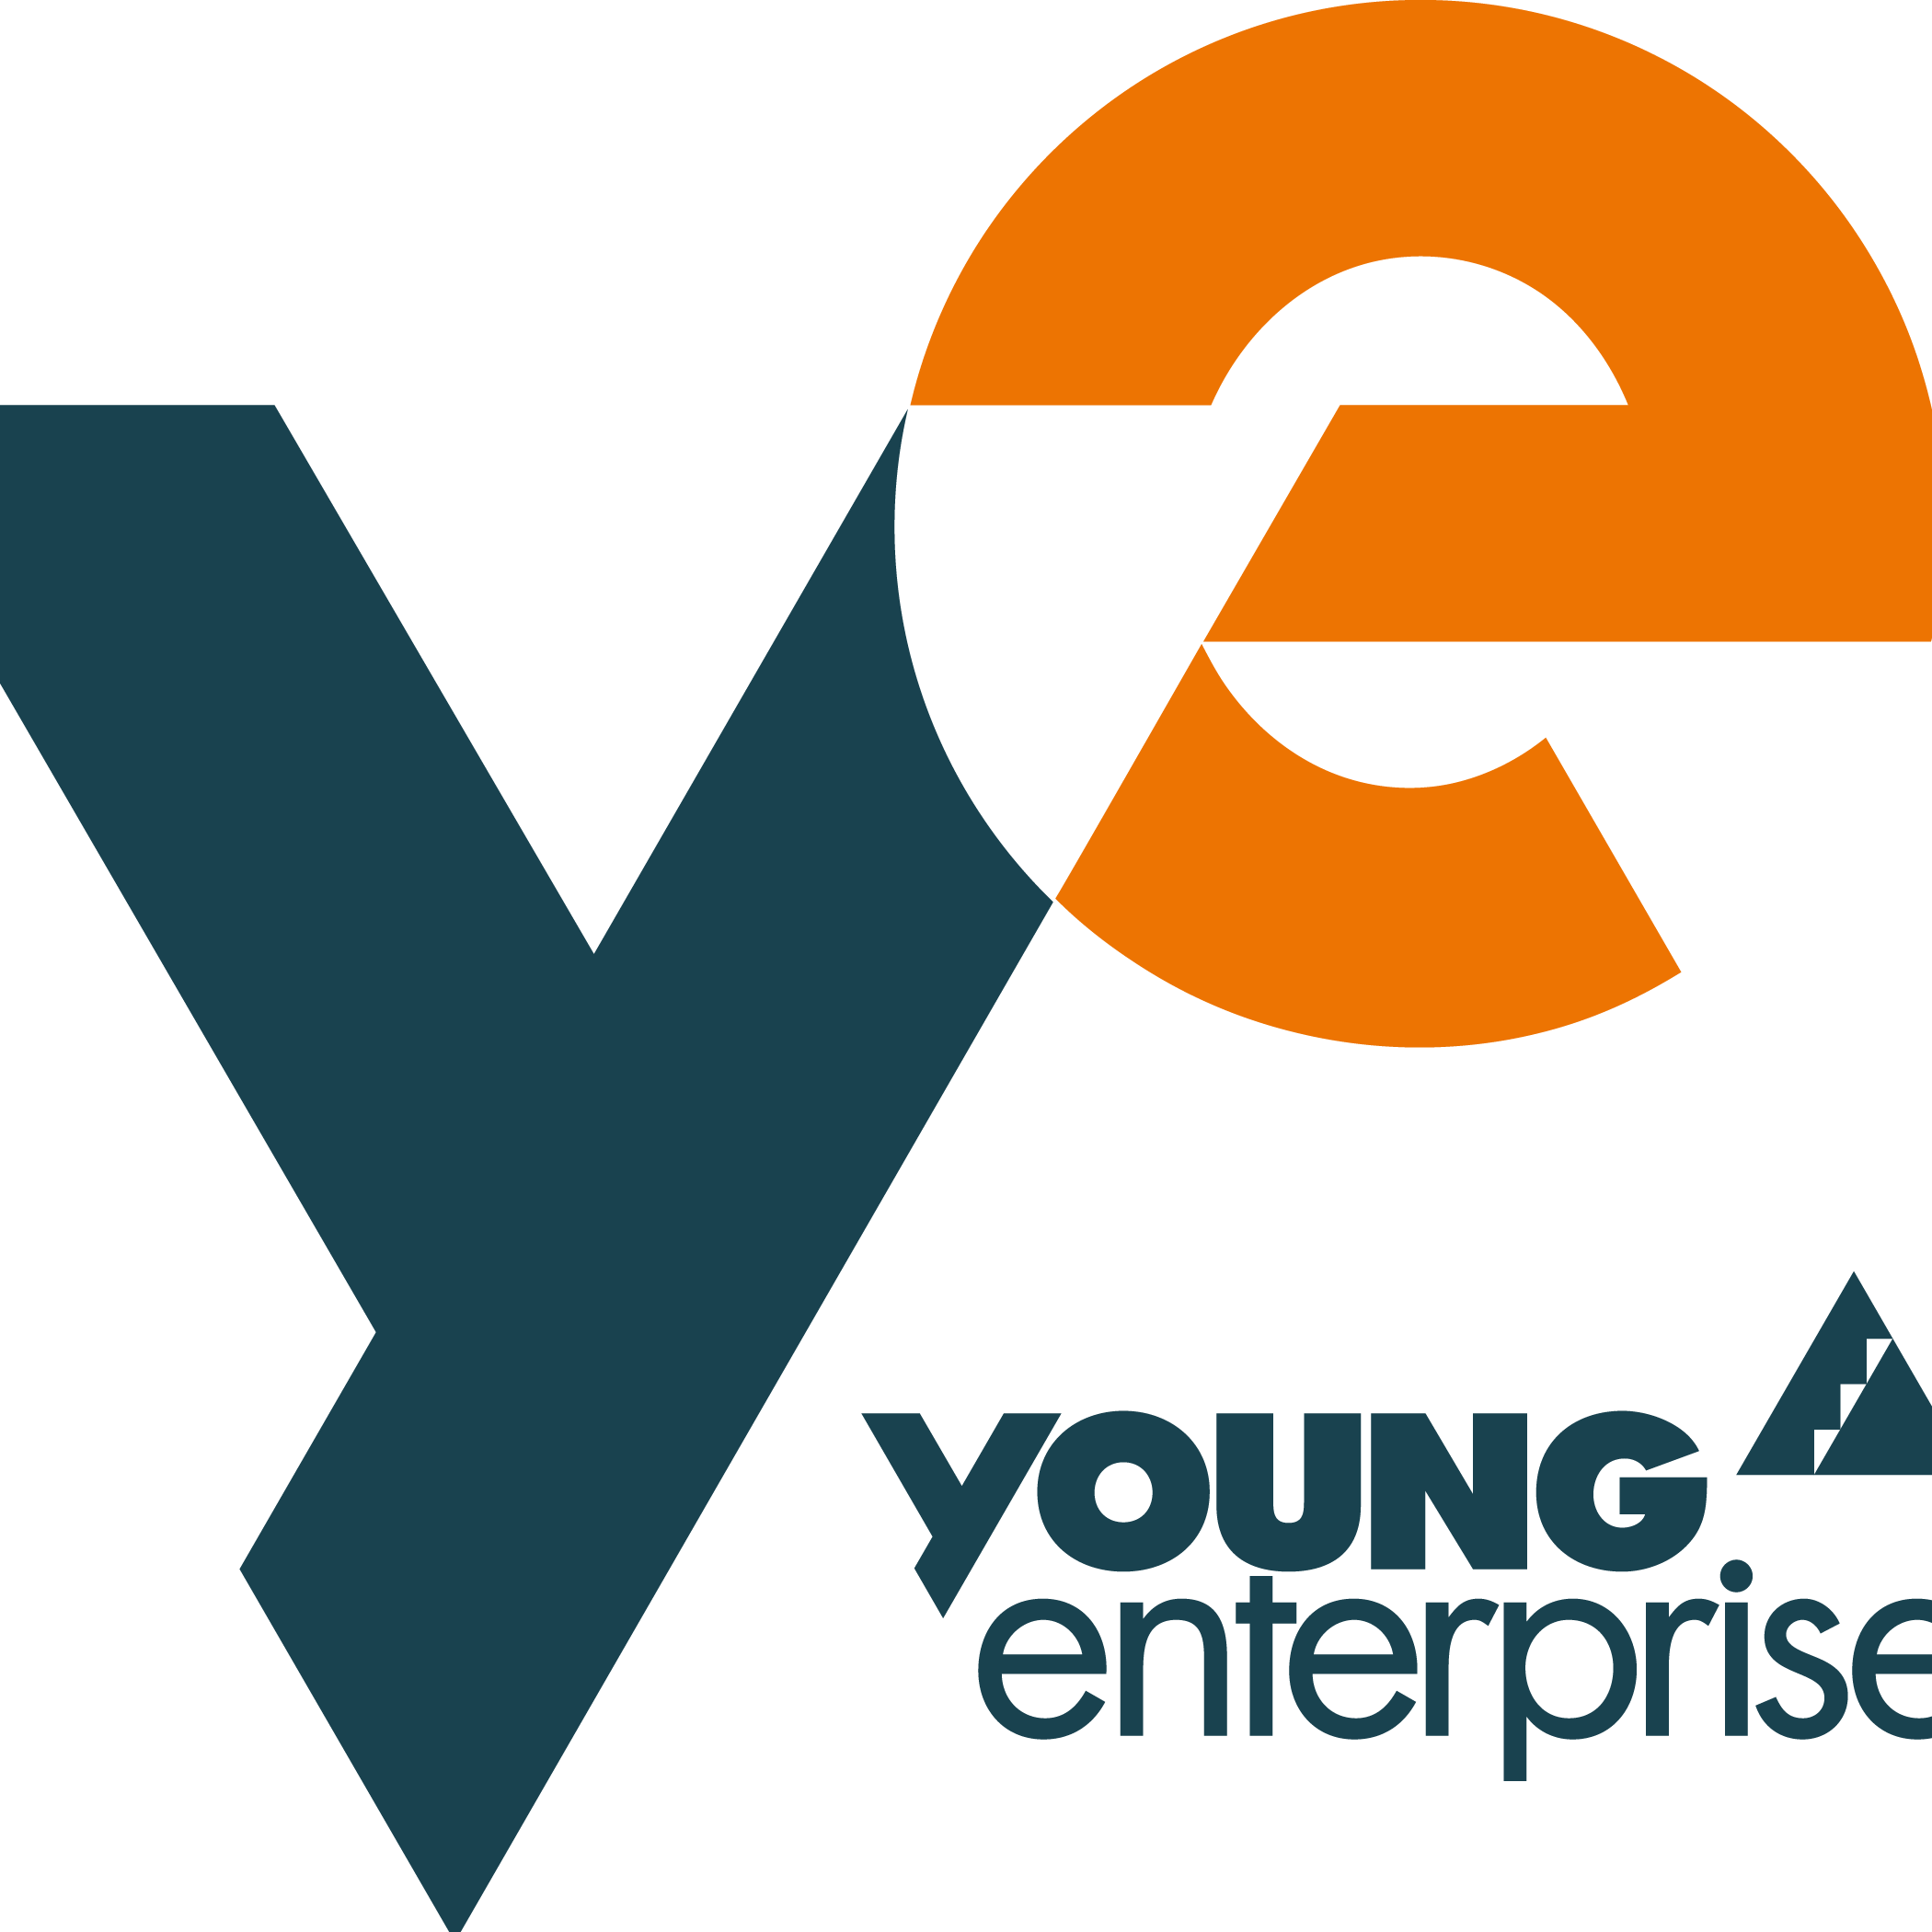 Young Enterprise is building an interconnected world of young people, business volunteers & educators, inspiring each other to succeed through enterprise.